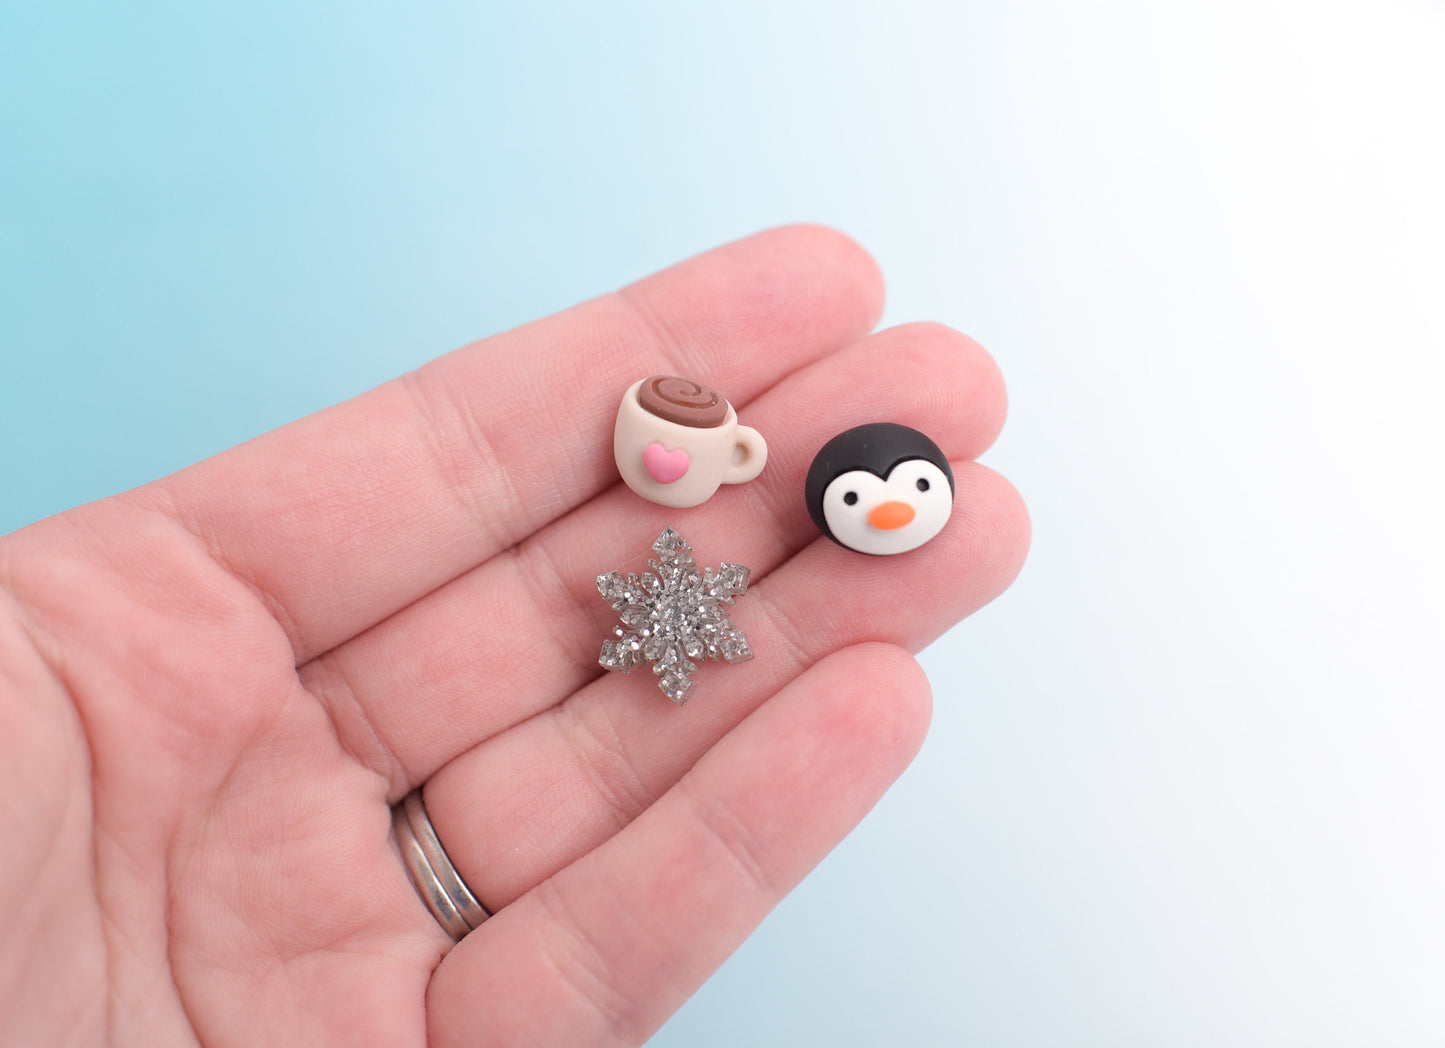 Penguin, Hot Cocoa, and Snowflake Earring Trio with Titanium Posts